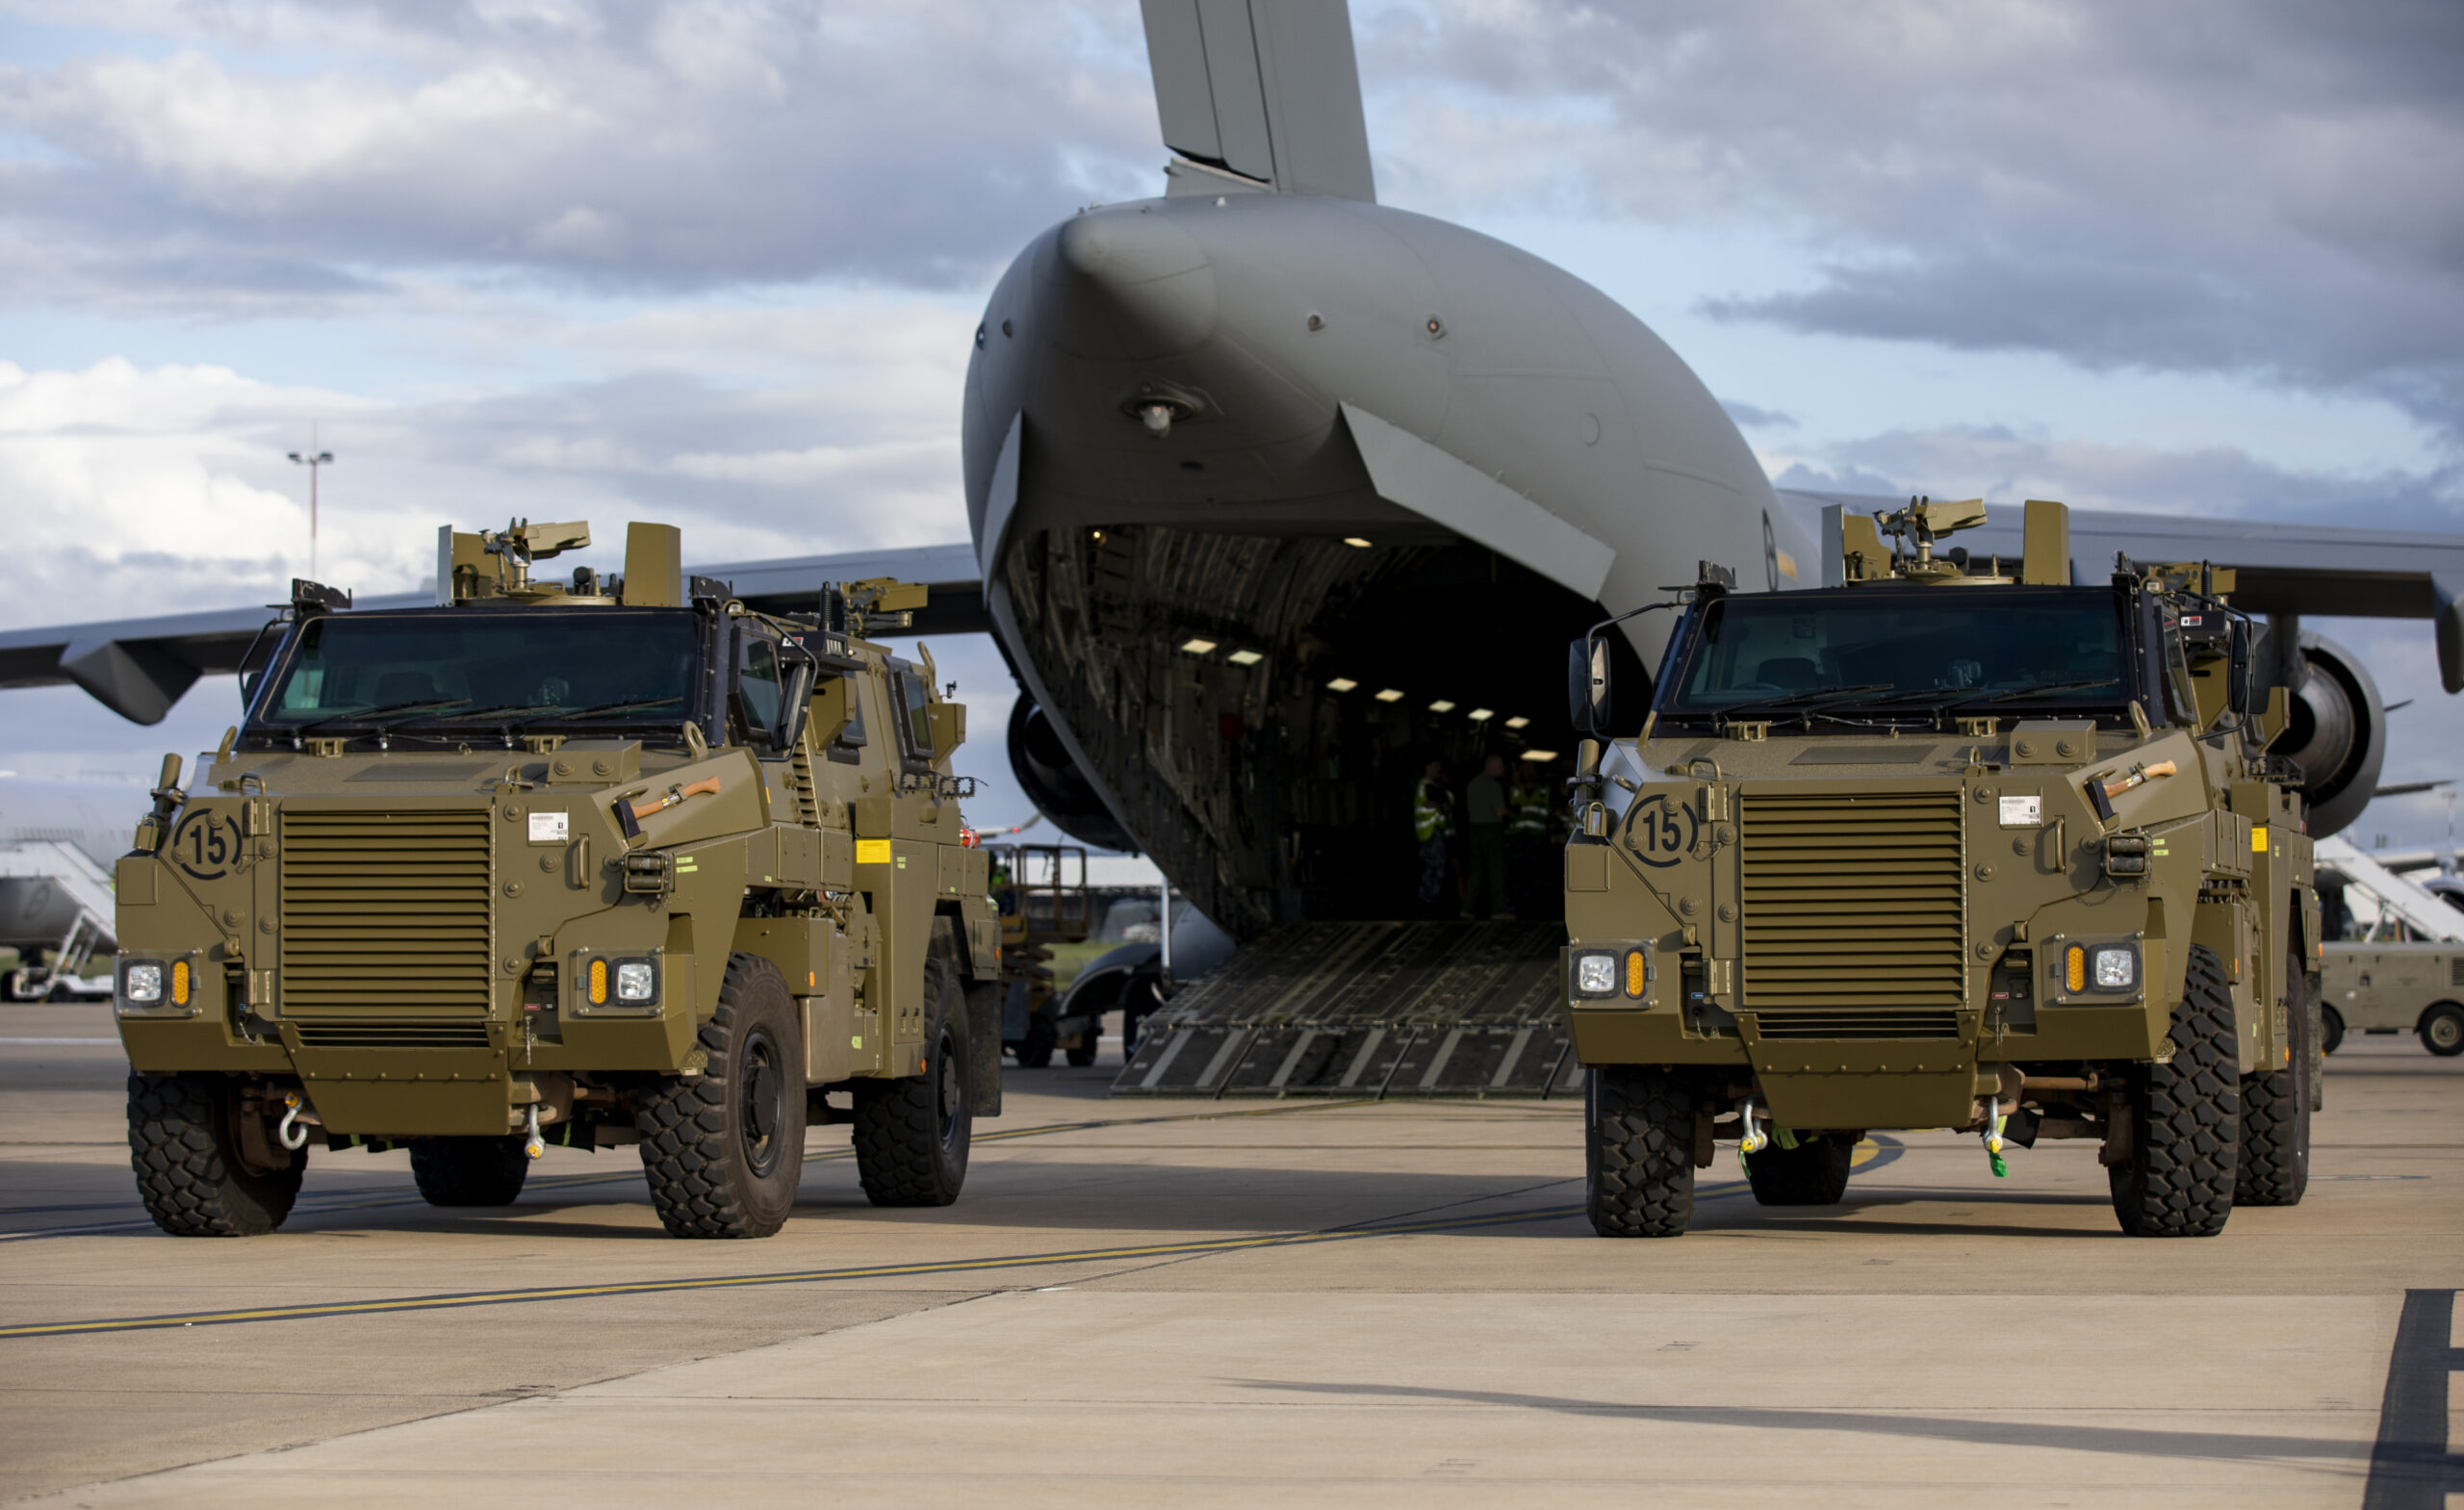 Two Bushmaster protected mobility vehicles bound for Ukraine wait to be loaded onto a C-17A Globemaster III aircraft at RAAF Base Amberley, Queensland. *** Local Caption *** The Australian Government has provided further support to the Government of Ukraine by gifting 20 Bushmaster Protected Mobility Vehicles, including two ambulance variants, to aid the Government of Ukraines response to Russias unrelenting and illegal aggression. Australias response follows a direct request from President Zelenskyy during his address to a joint sitting of the Parliament of Australia on 31 March 2022. The Bushmaster Protected Mobility Vehicle was built in Australia to provide protected mobility transport, safely moving soldiers to a battle area prior to dismounting for close combat. The Bushmaster Protected Mobility Vehicle is well suited to provide protection to the Ukrainian Armed Forces soldiers and Ukrainian civilians against mines and improvised explosive devices, shrapnel from artillery and small arms fire. The vehicles have been painted olive green to suit the operating environment. Additionally, a Ukrainian flag is painted on either side with the words United with Ukraine stencilled in English and Ukrainian to acknowledge our commitment and support to the Government and people of Ukraine. The ambulances will have the traditional red cross emblem. The Bushmaster Protected Mobility Vehicles will be fitted with radios, a global positioning system and additional bolt-on armour increasing their protection.